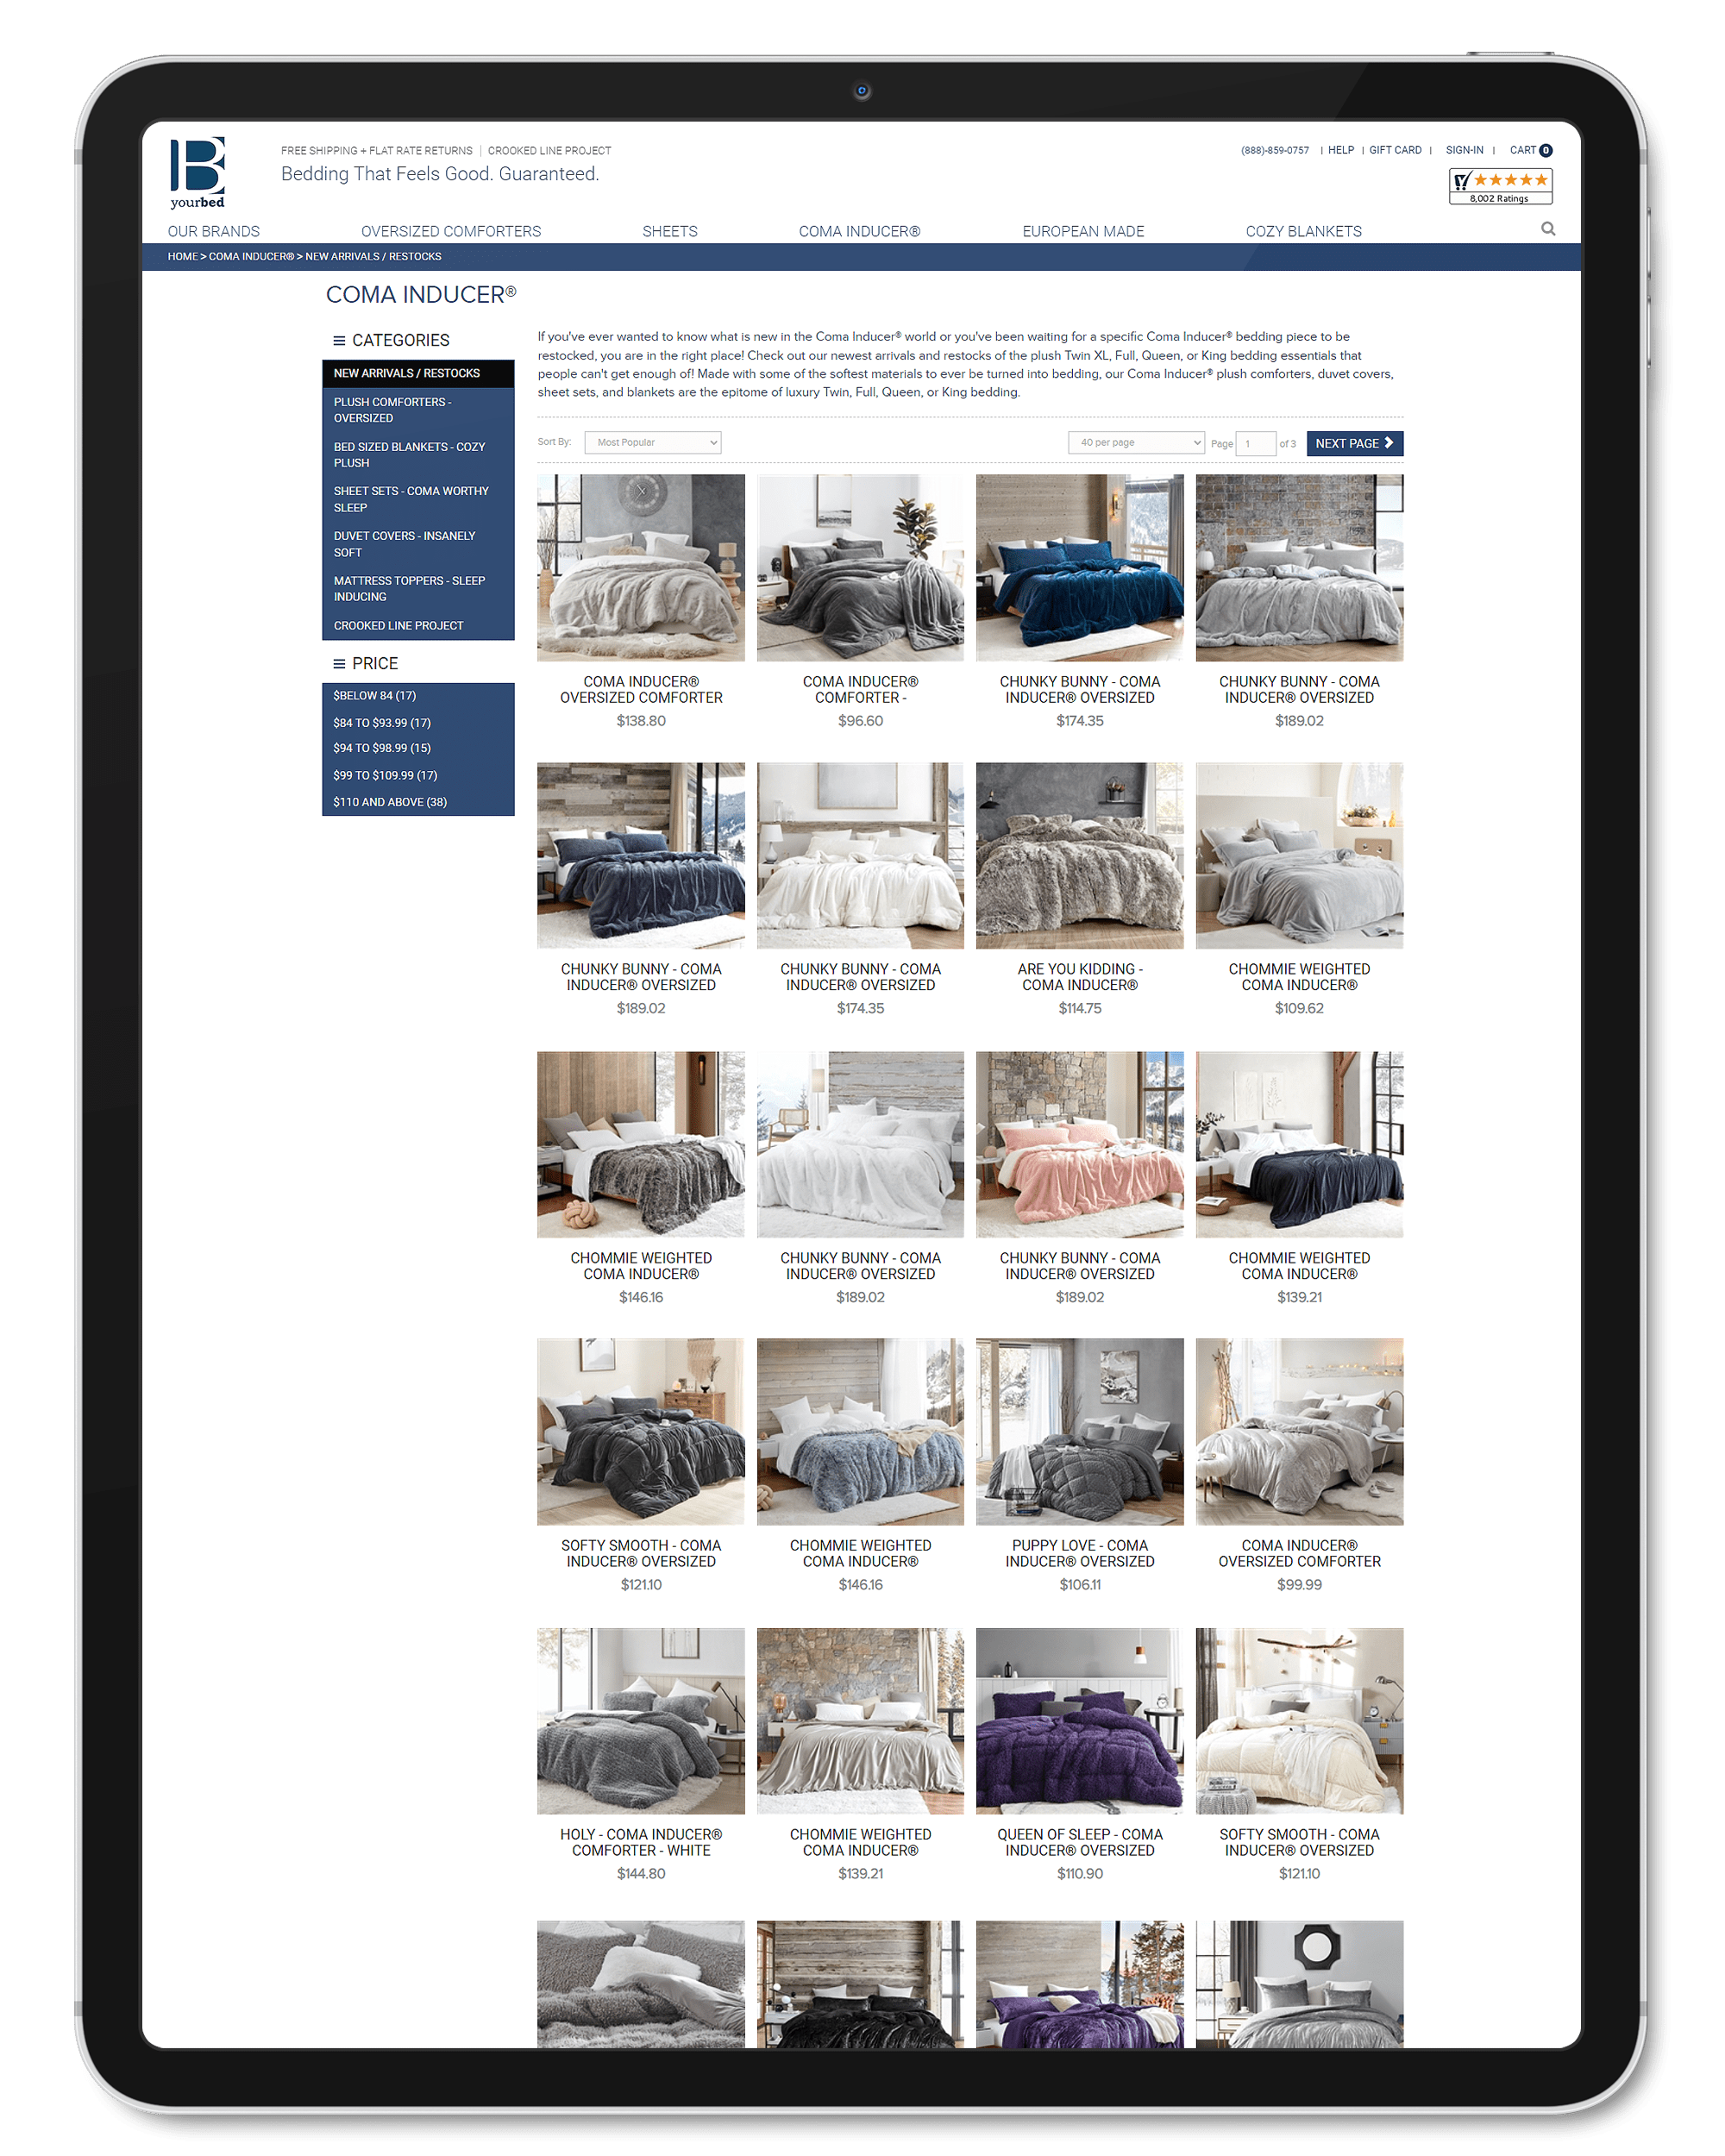 ByourBed - BigCommerce Design and Development